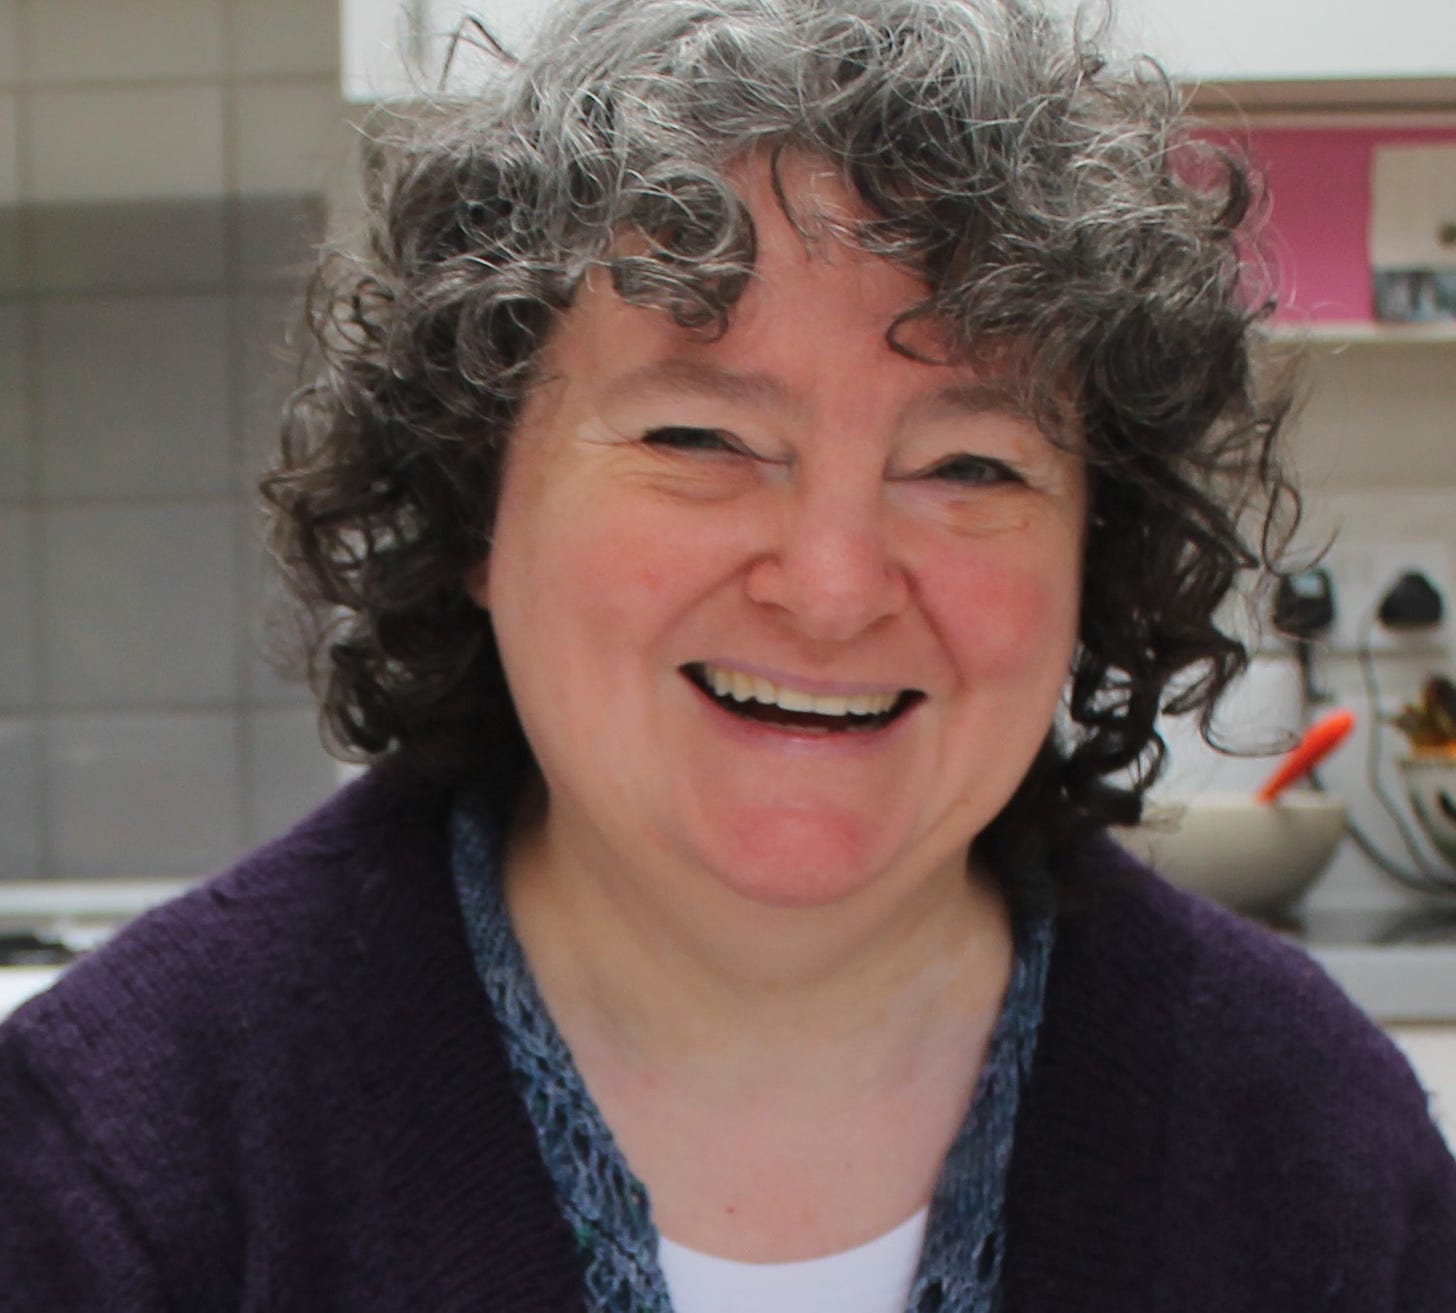 A white women with dark curly hair sitting in a kitchen smiling. It's me! Your author.